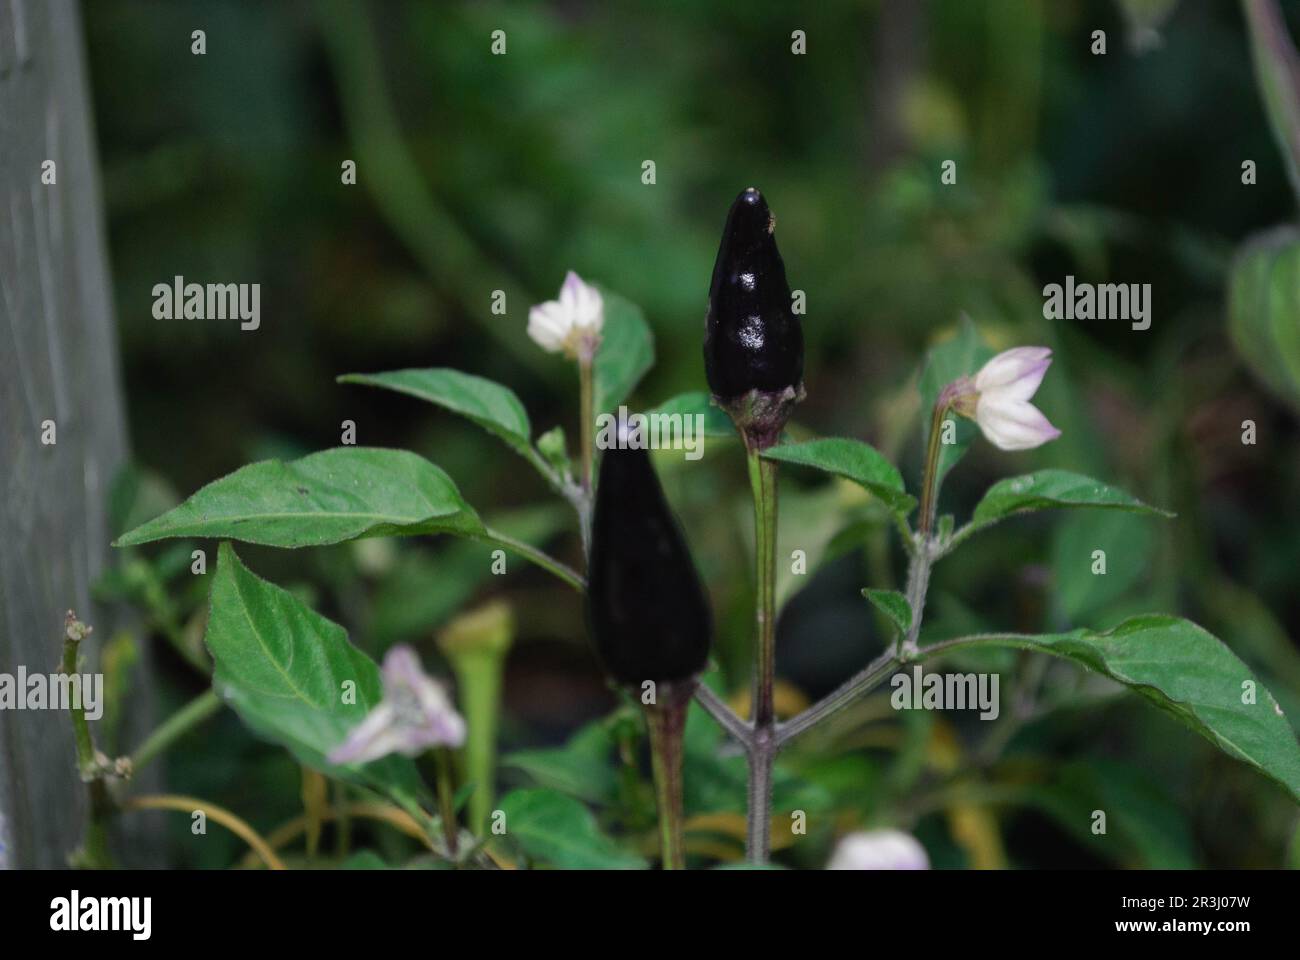 Capsicum Annuum, usually known as Black Hungarian Pepper or Chili with bokeh or blurred background Stock Photo